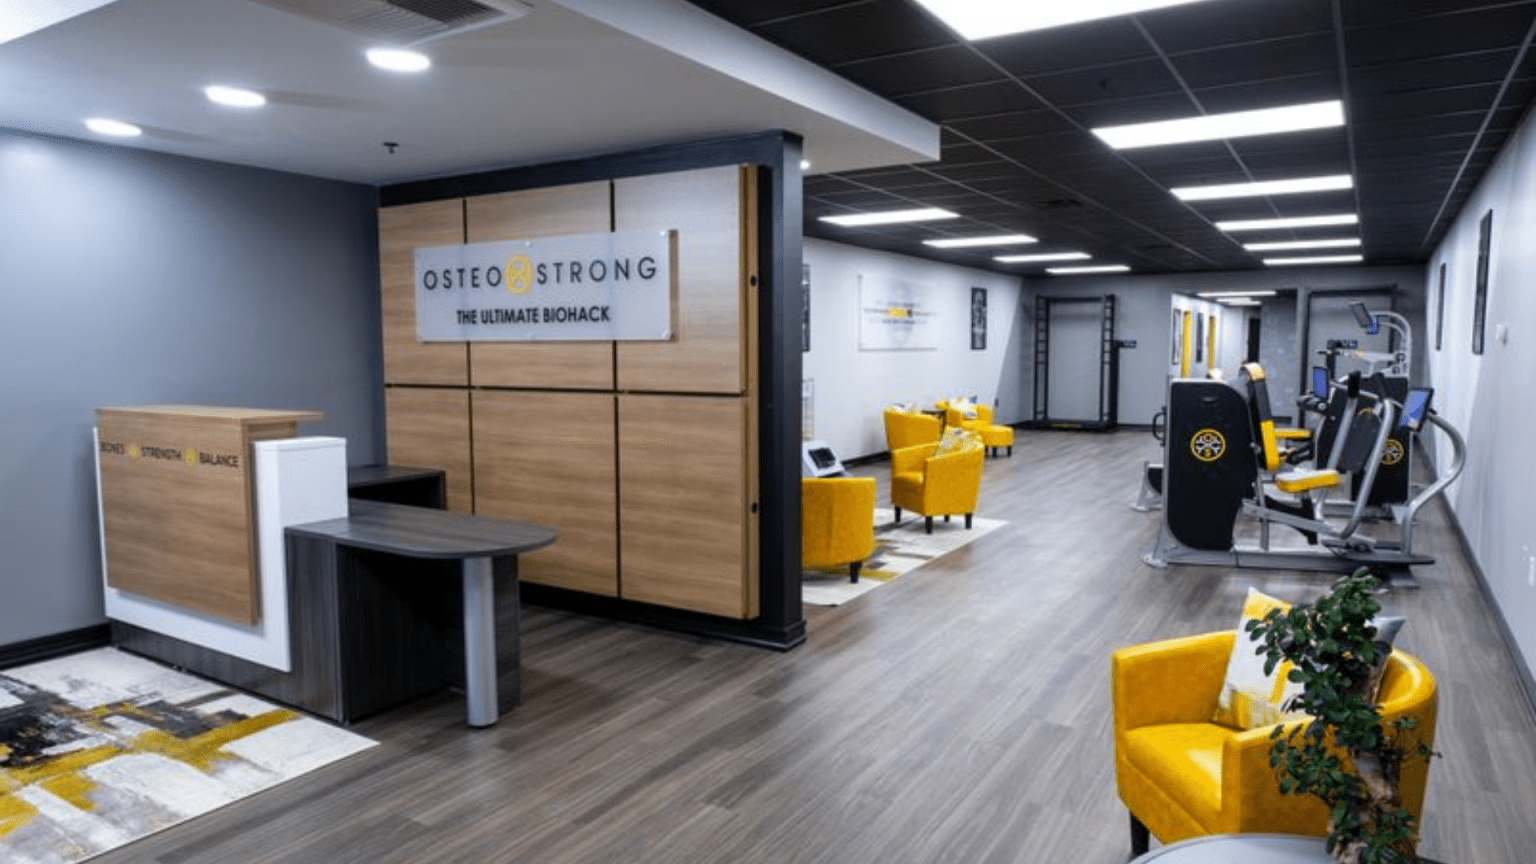 The reception area of OsteoStrong, featuring a modern, clean design with wood accents, a reception desk, and seating areas with yellow chairs. Exercise equipment is visible in the background.